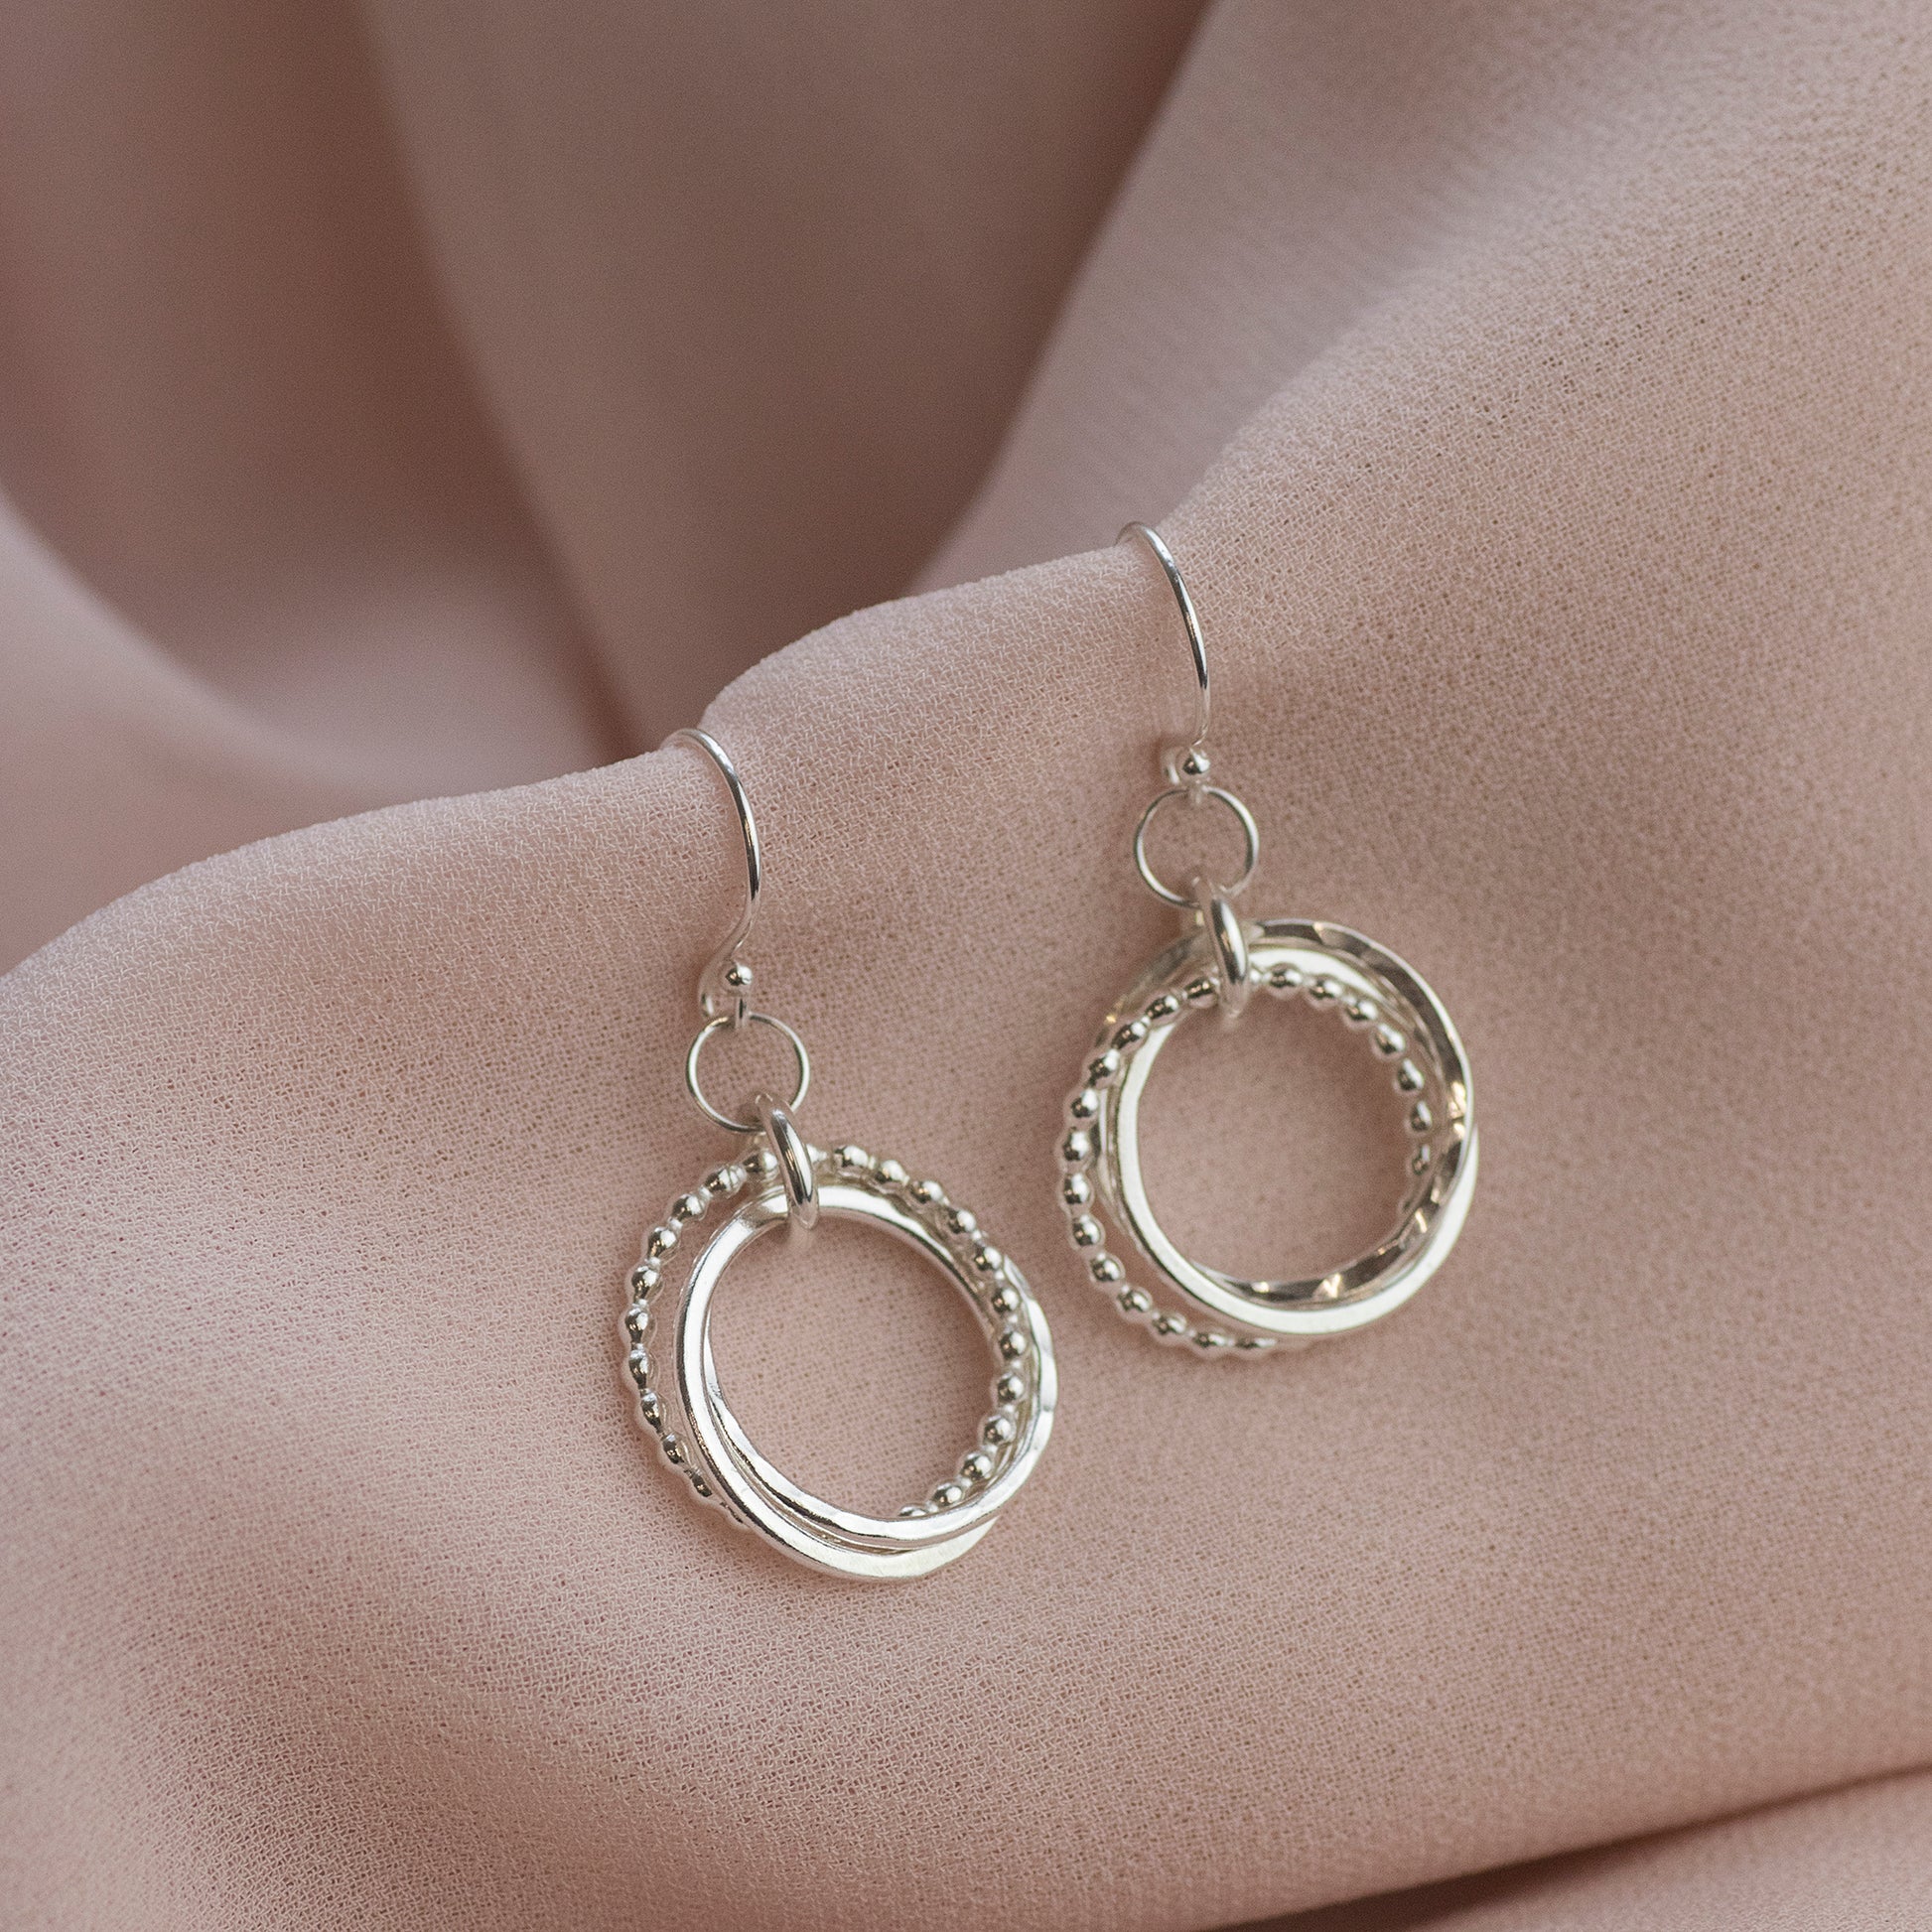 30th Birthday Earrings - 3 Links for 3 Decades - Silver